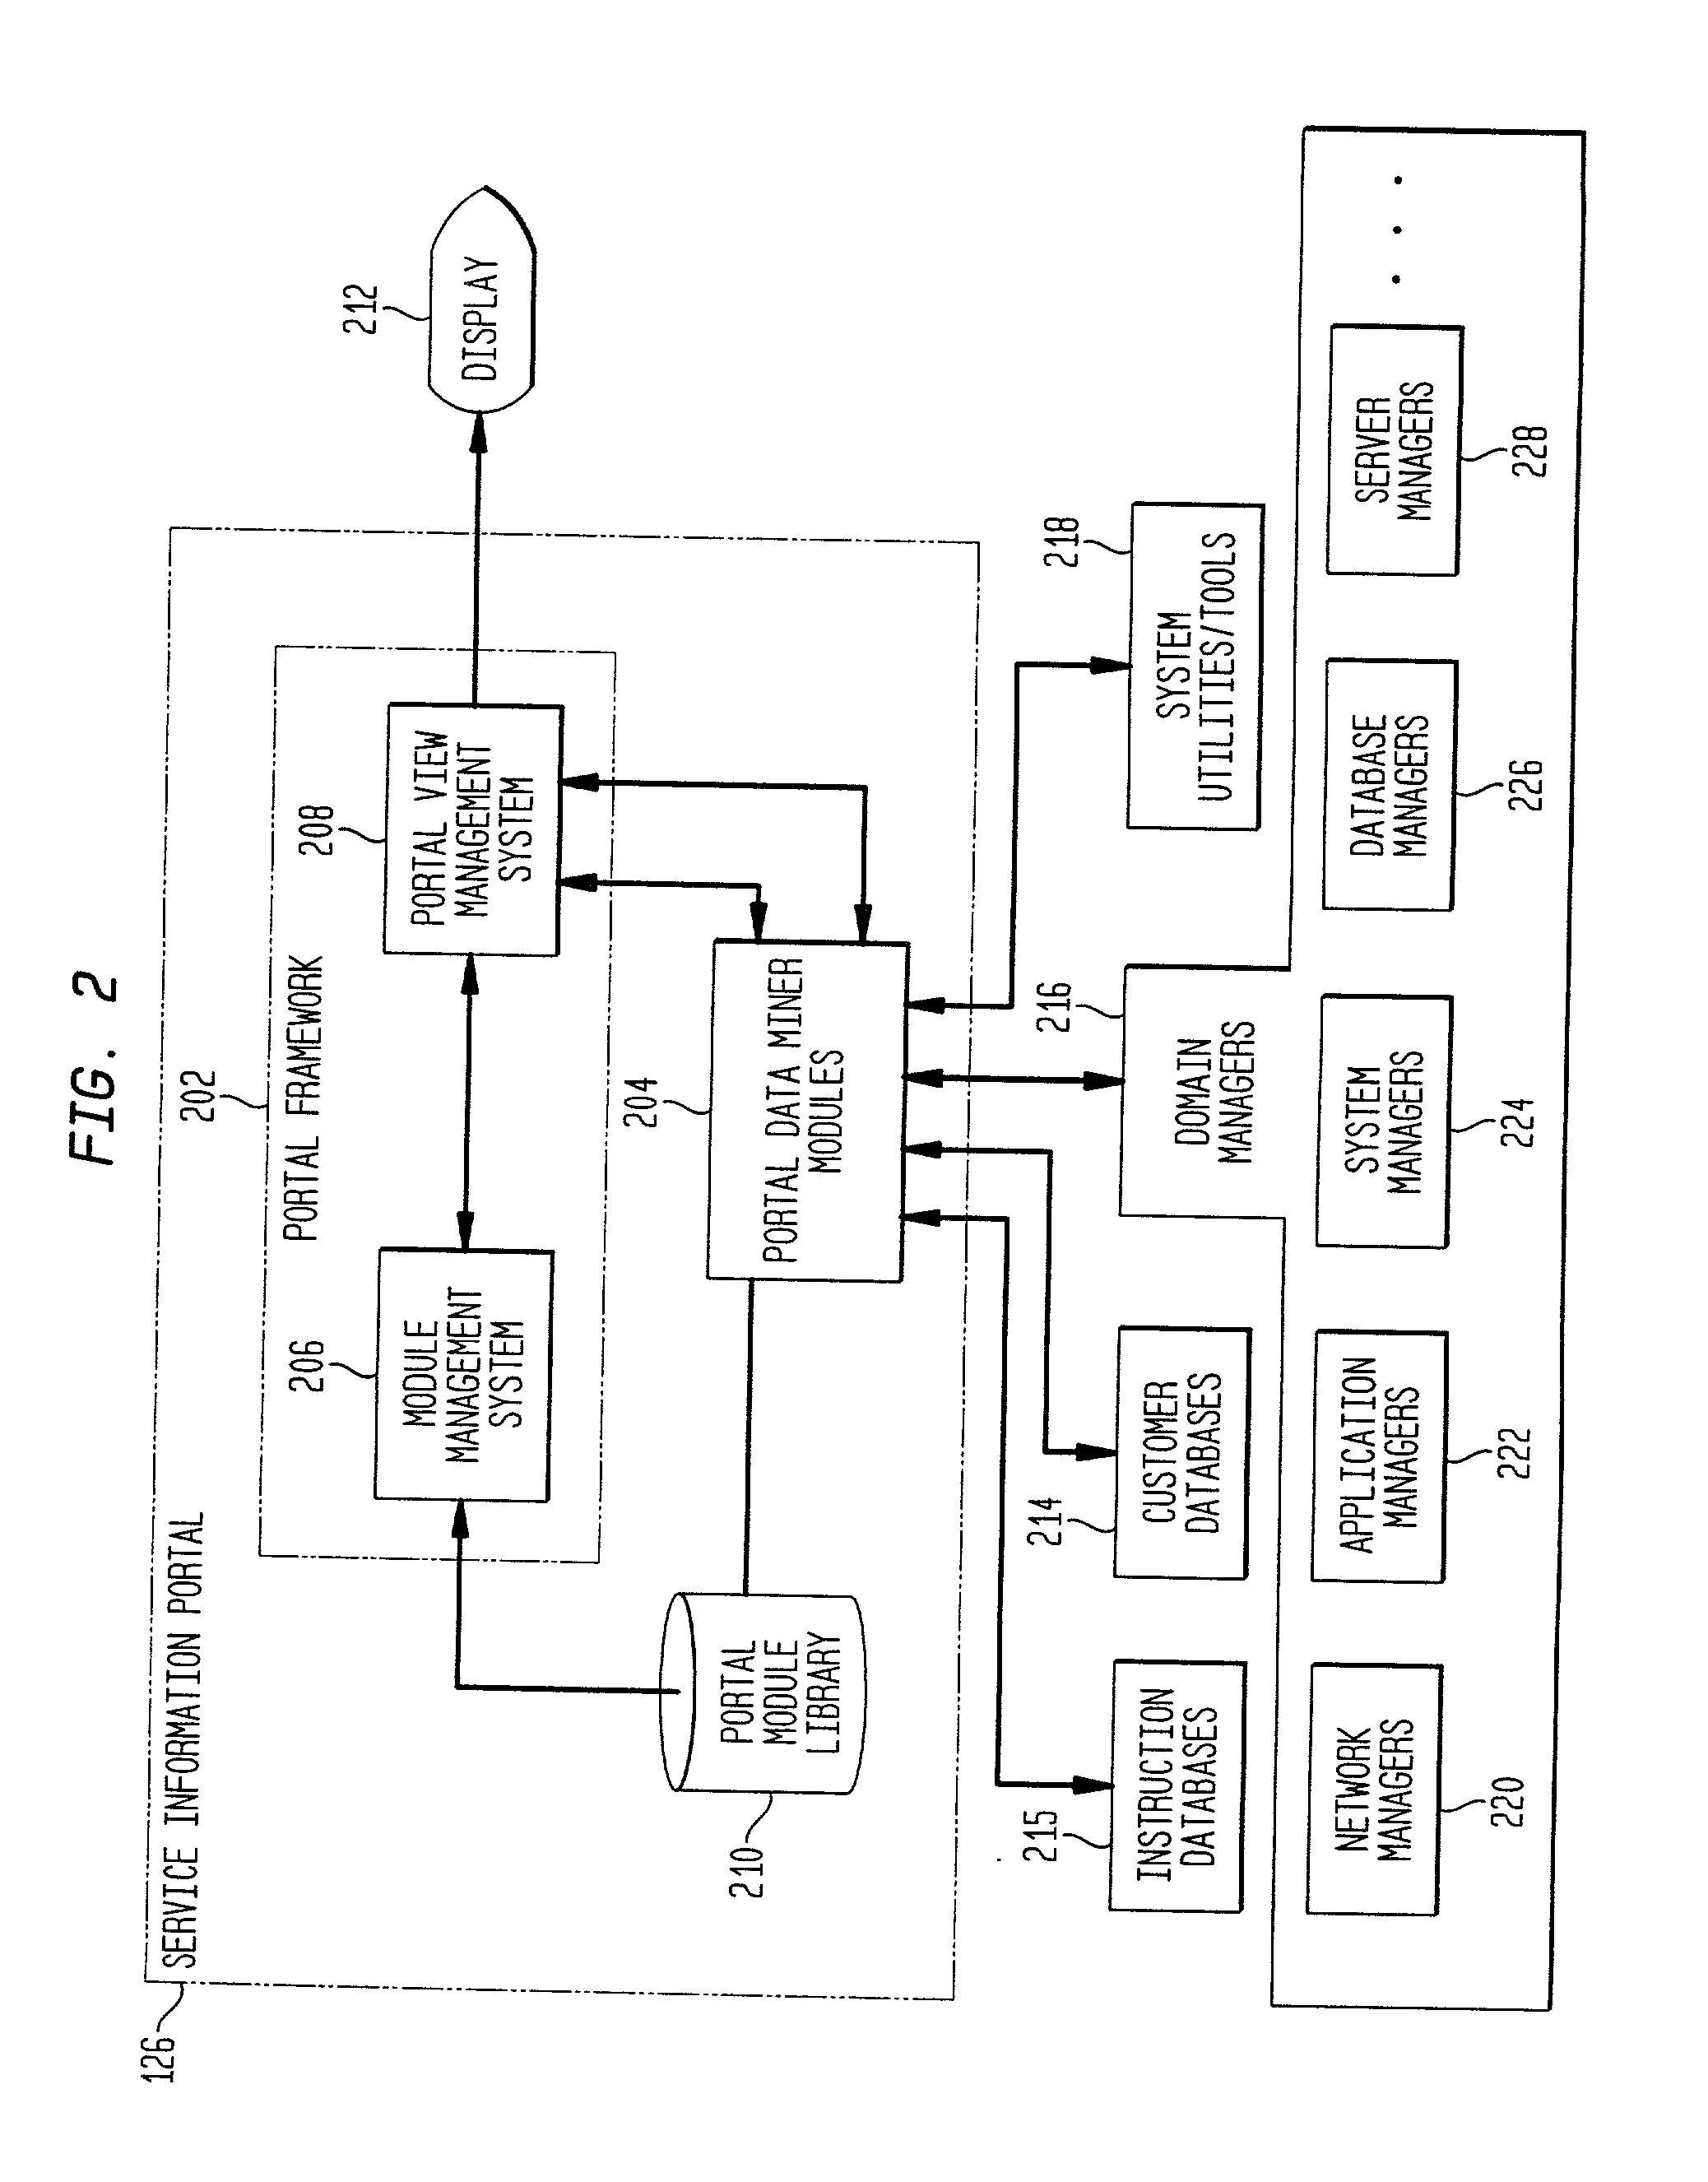 Portal system and method for managing resources in a networked computing environment